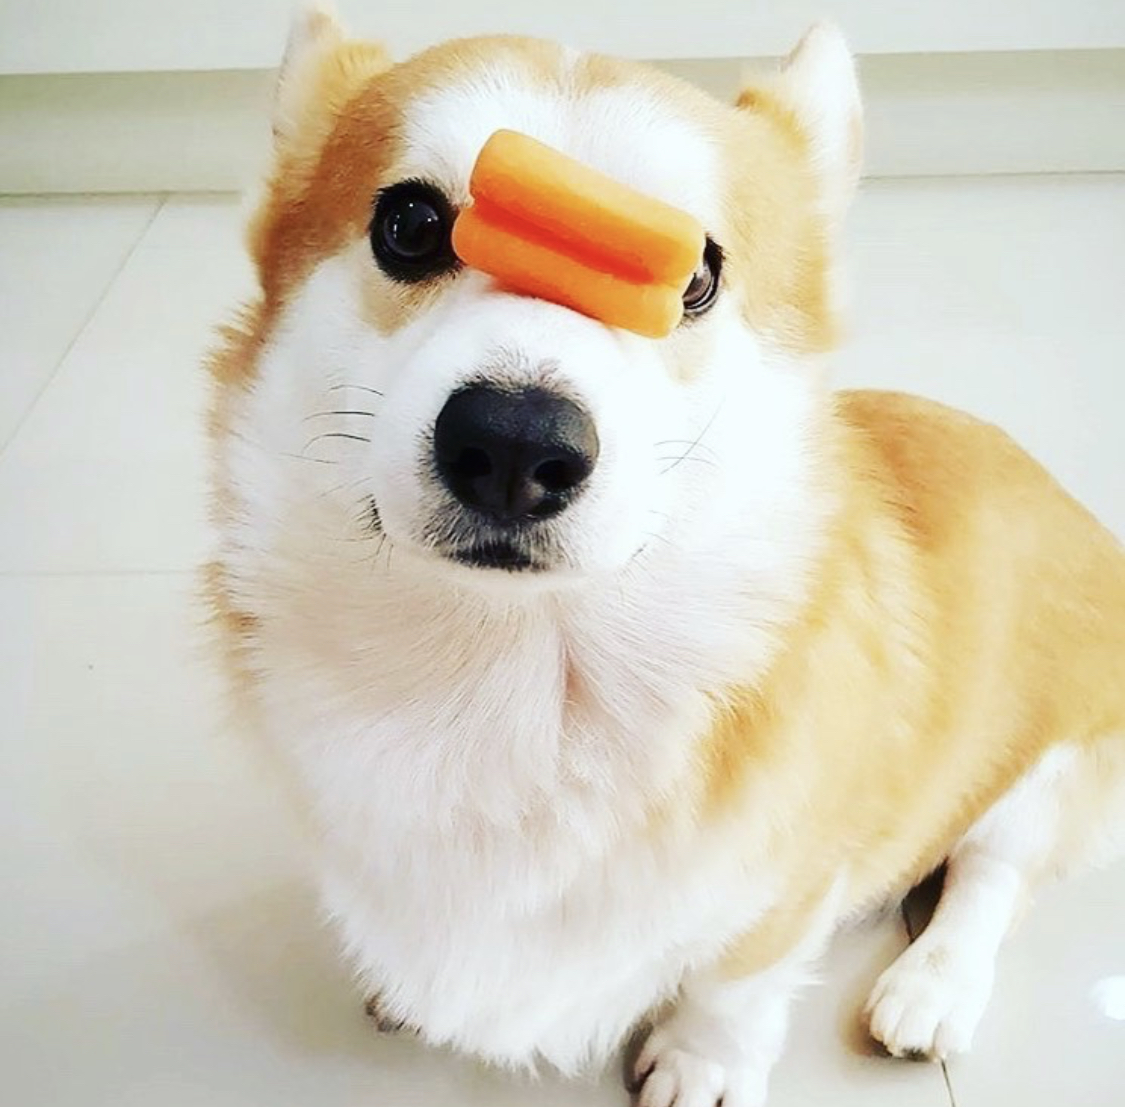 Corgi sitting on the floor with slice of carrots on top of its muzzles